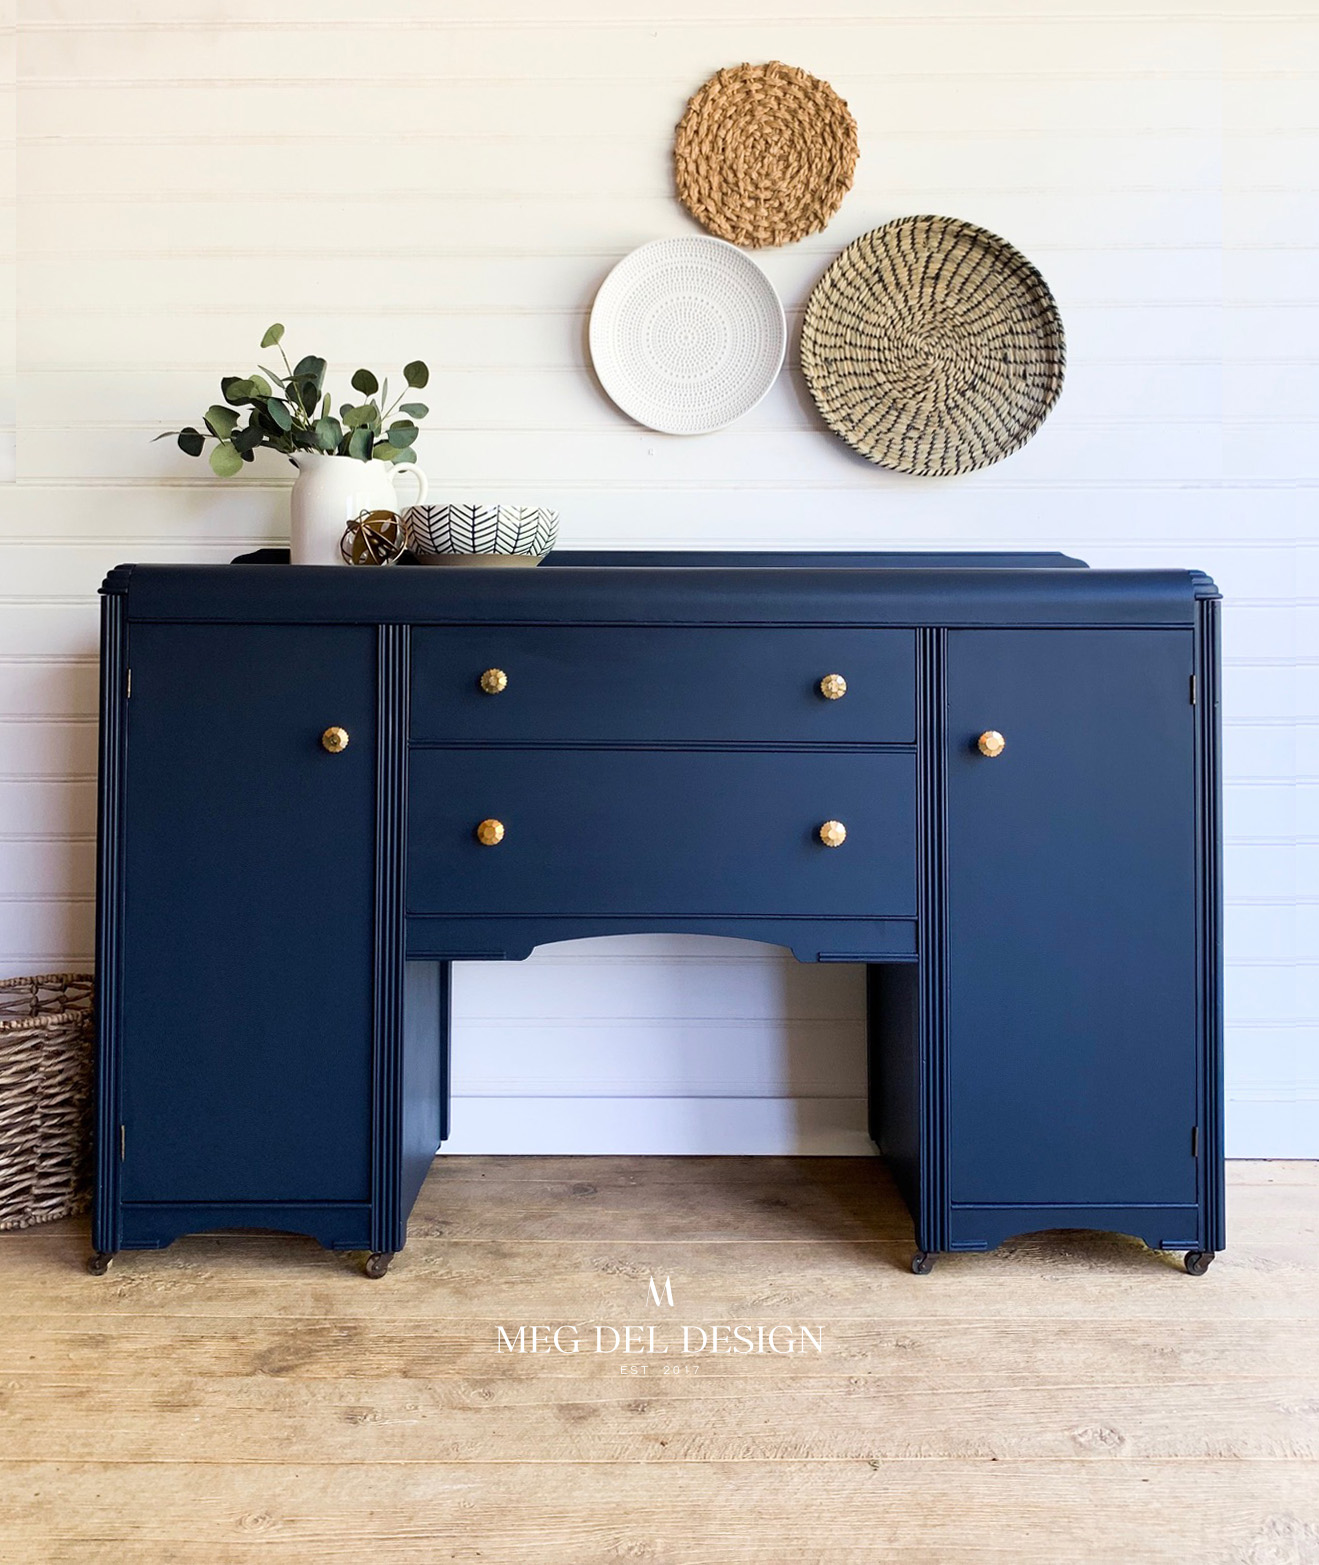 Dresser to Changing Table - Meg Del Design - Get The Look!